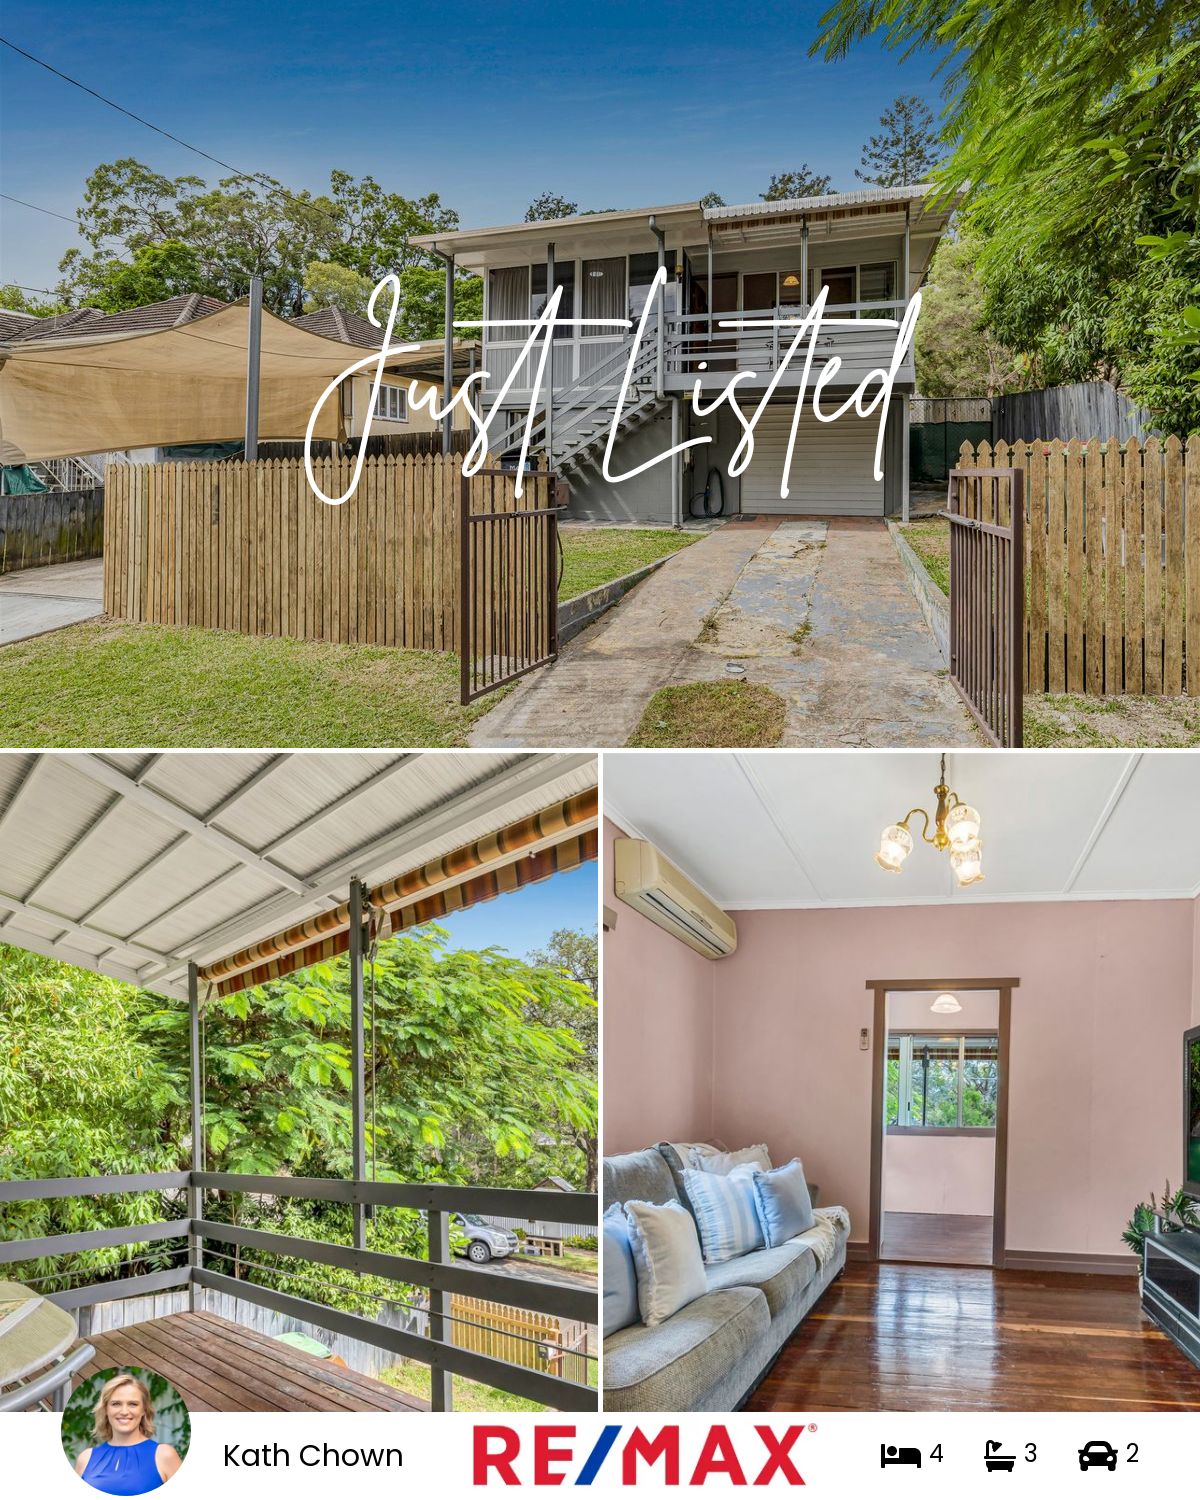 18 Florence Street, Annerley, QLD 4103 | Realty.com.au